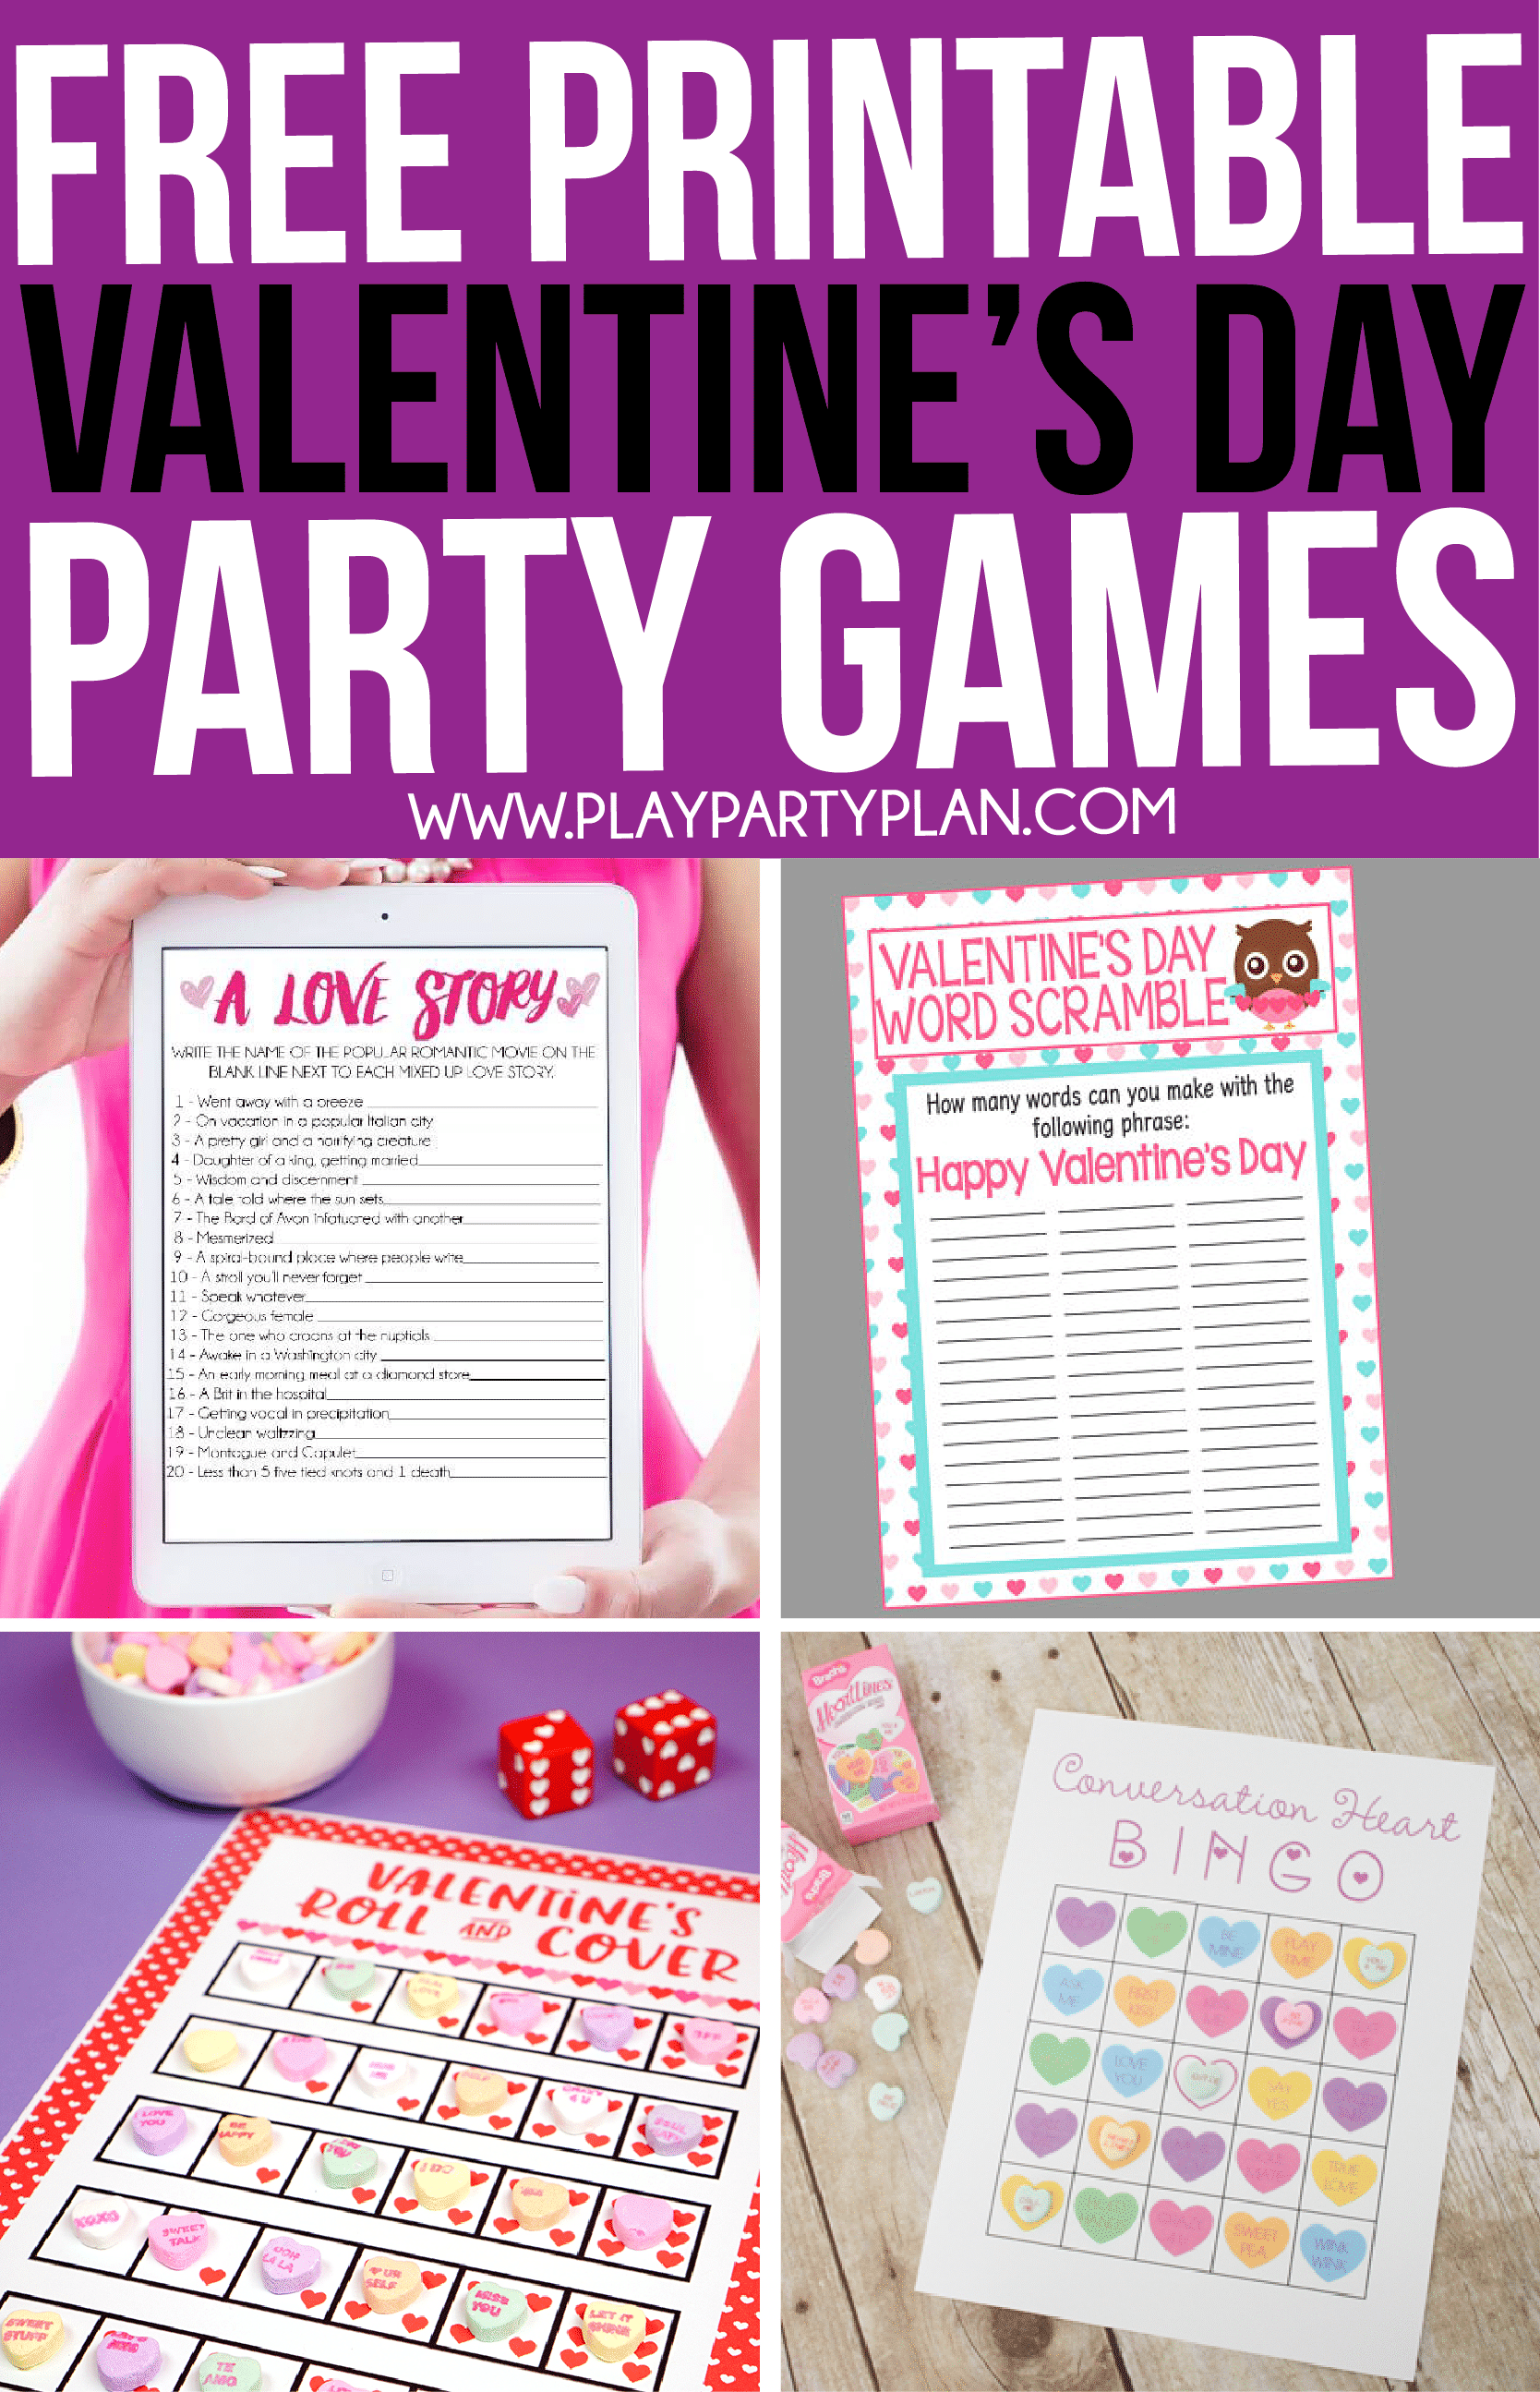 free-printable-valentine-games-for-adults-free-printable